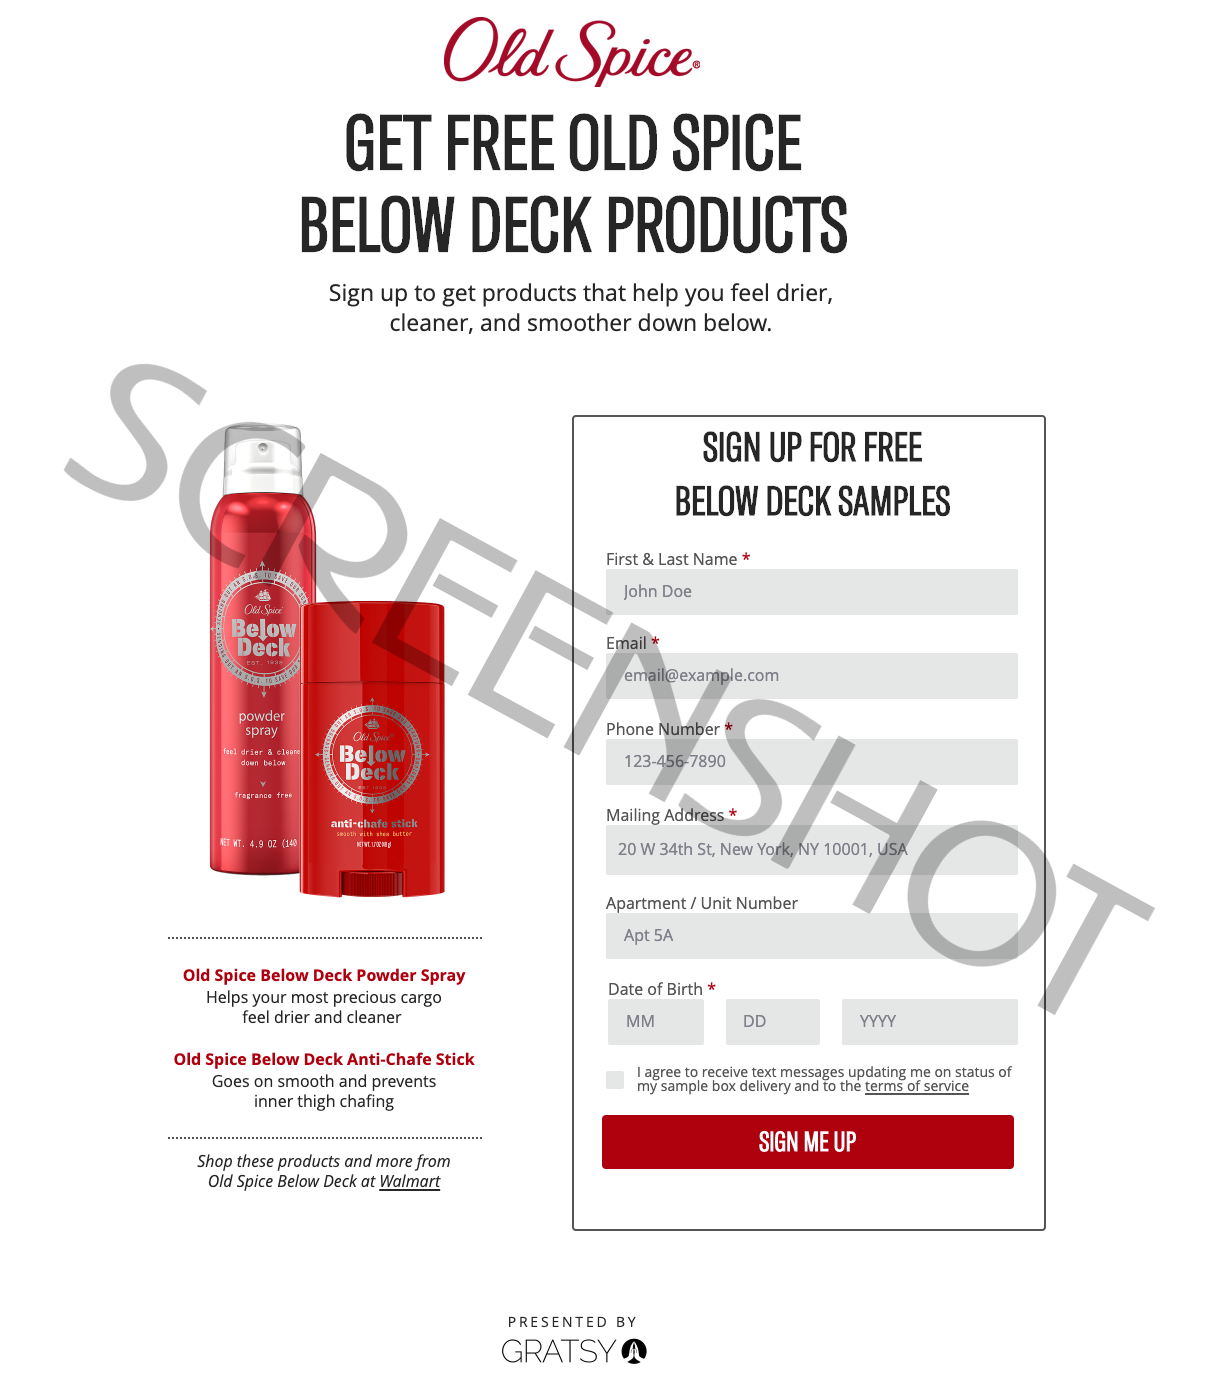 Screenshot of FREE Old Spice Below Deck Products offer